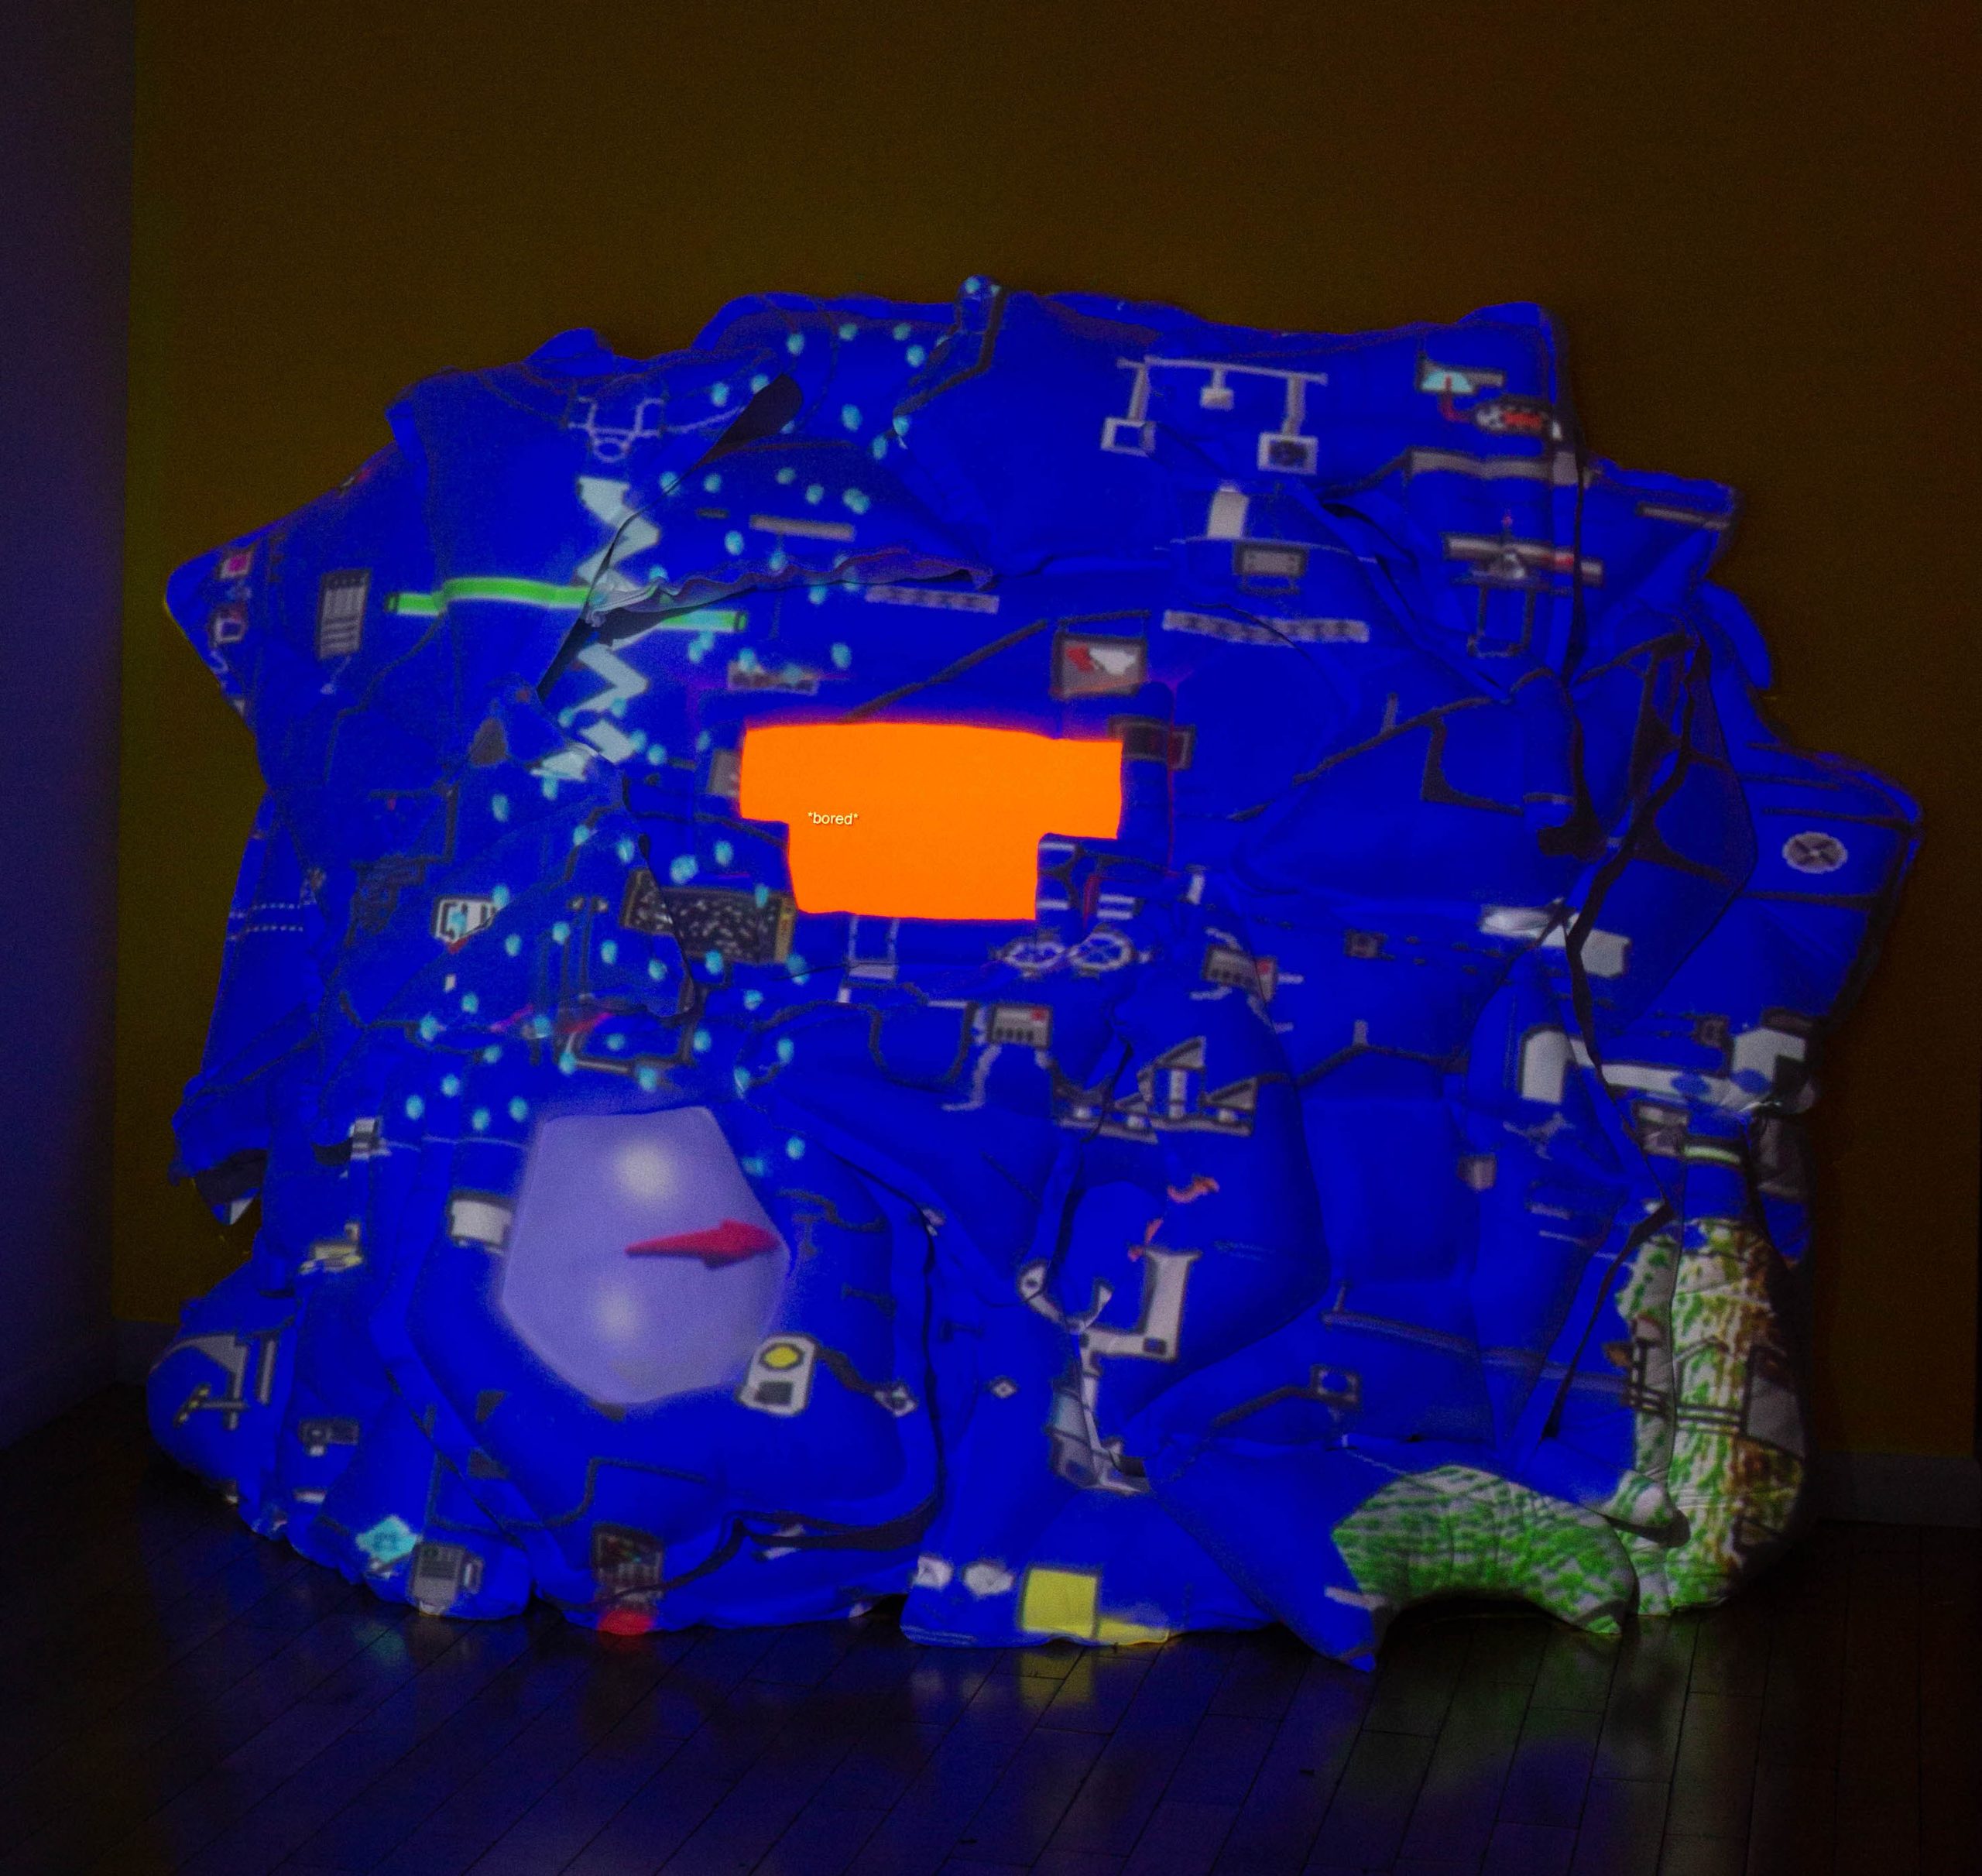 Soft Computing (Lurking Variable !=), 2020, Video Projection Mapping on Soft Sculpture, Embedded TV Screen, 4.5 x 9 x 2.5 ft 